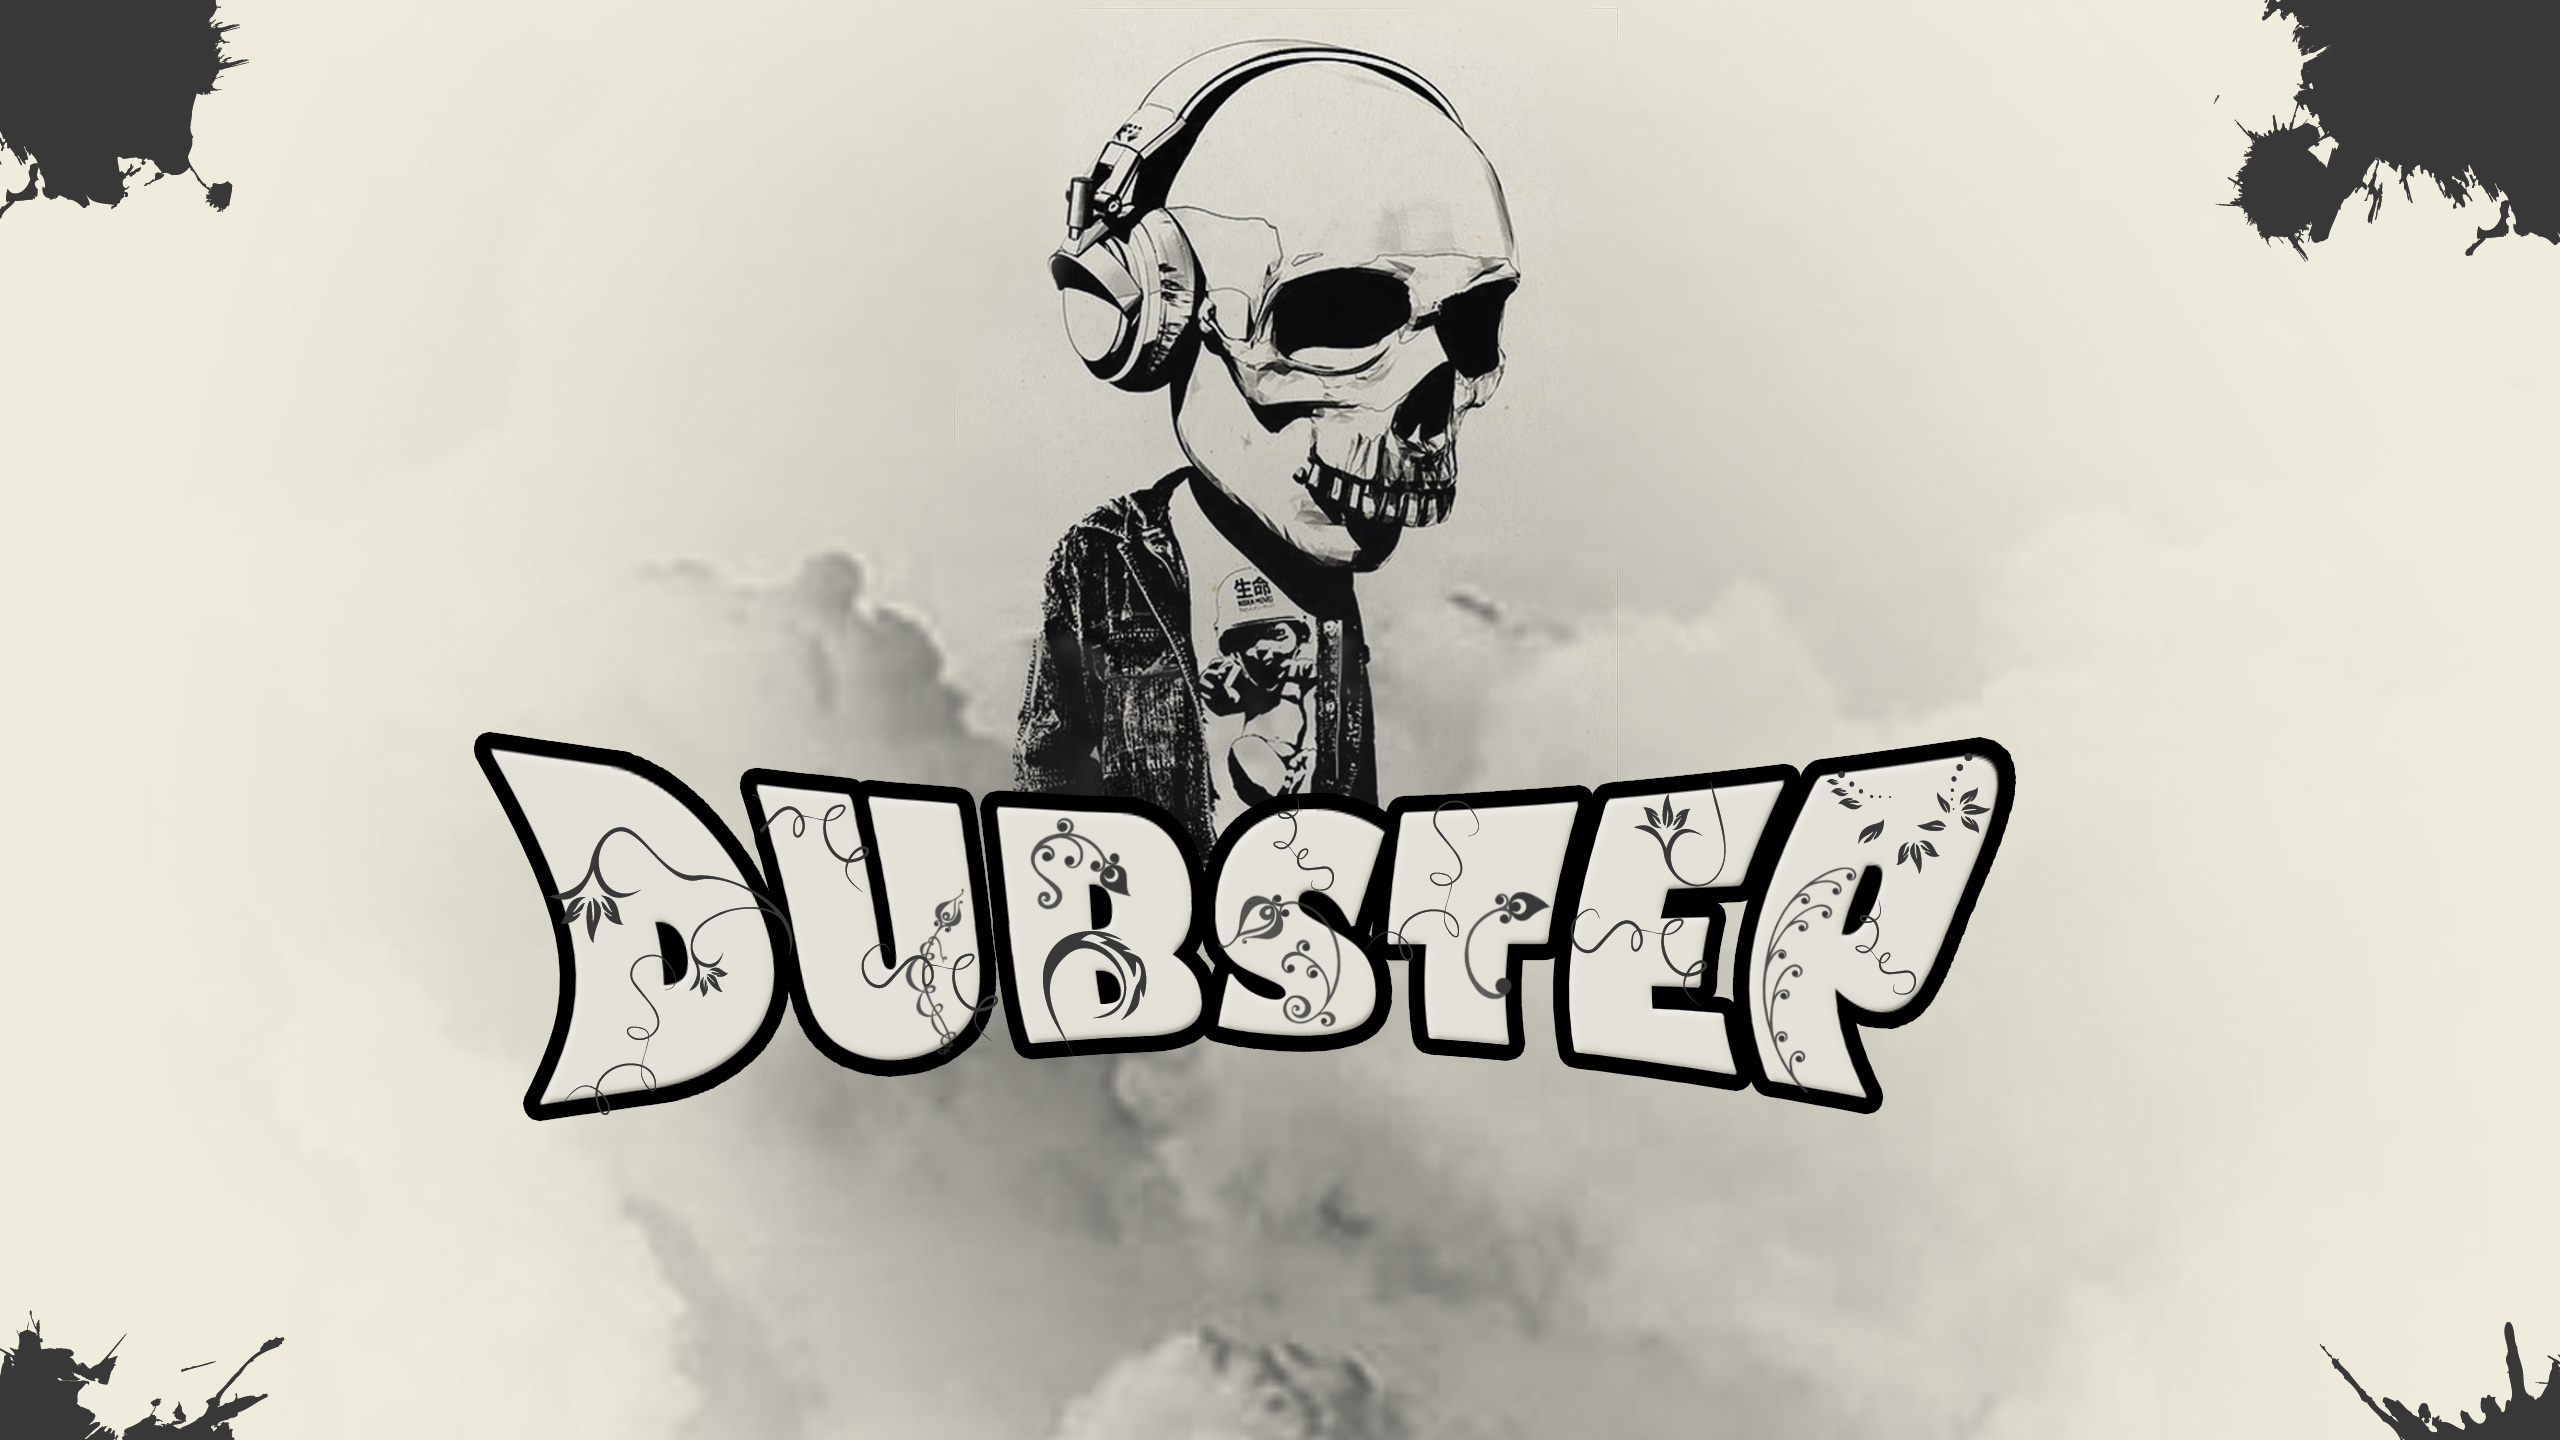 Drawing, Dubstep, Graphic Design, Illustration, Text. Wallpaper in 2560x1440 Resolution